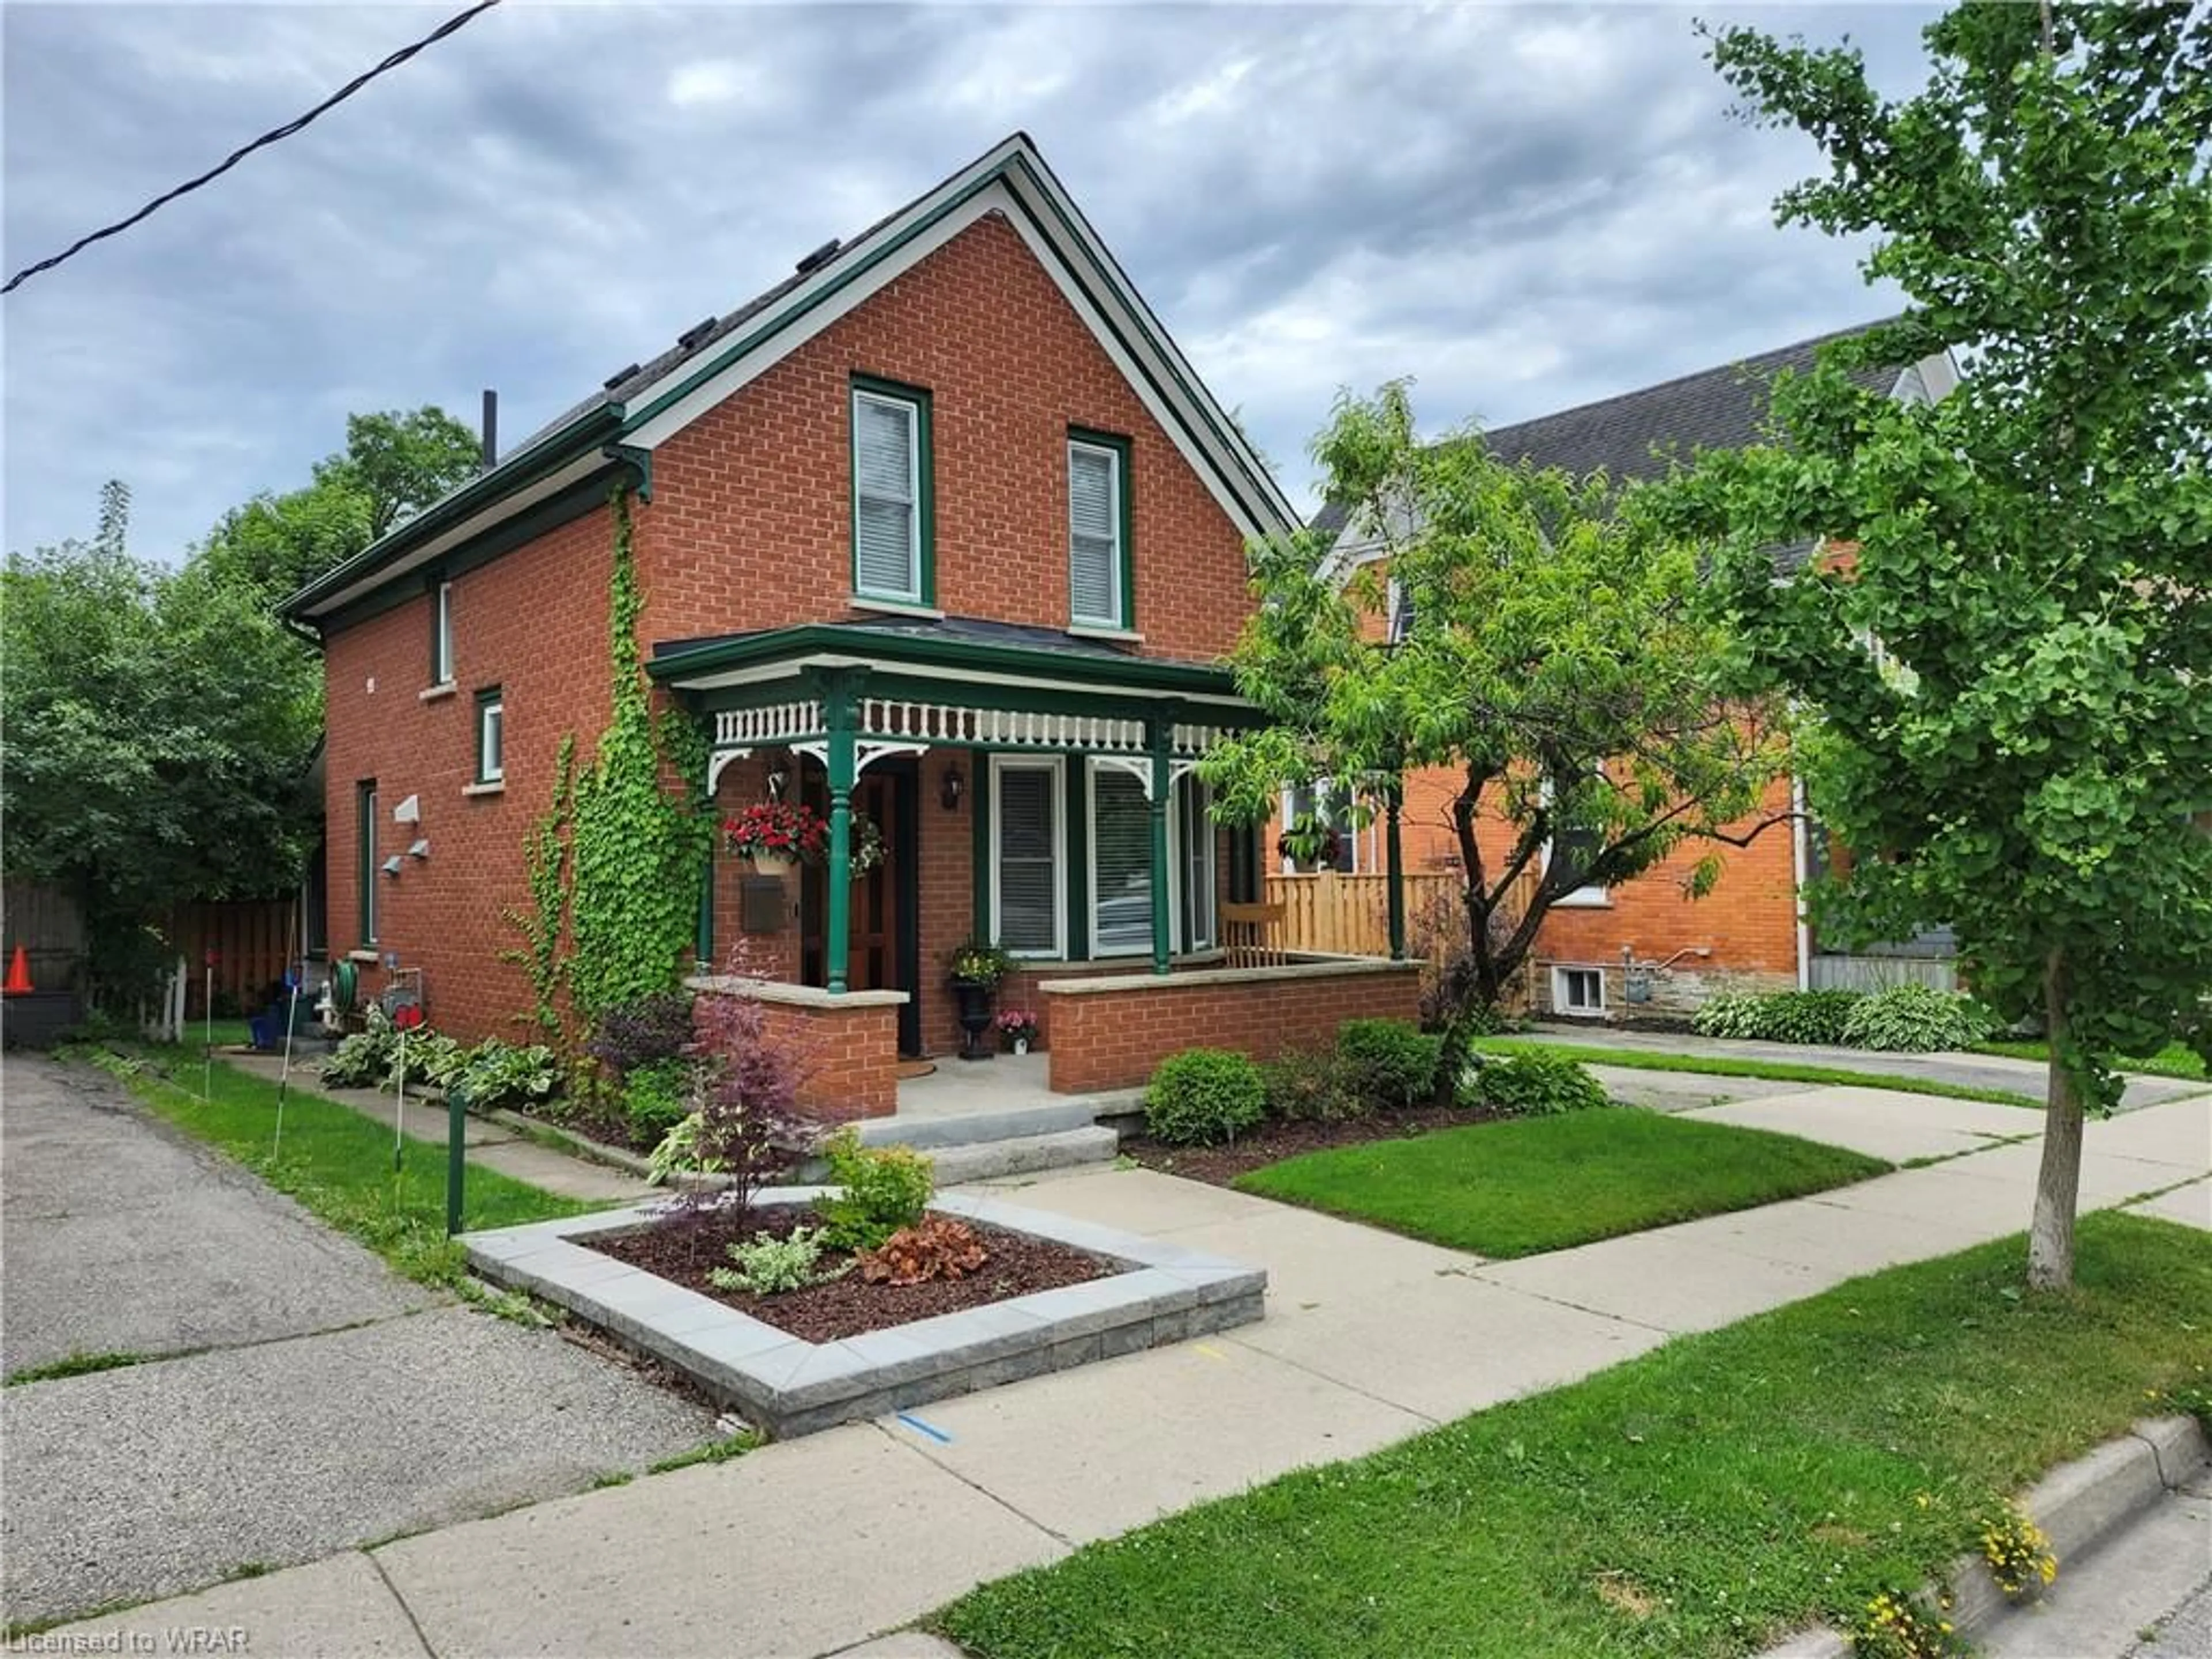 Home with brick exterior material for 73 Water St, Kitchener Ontario N2G 1Z4